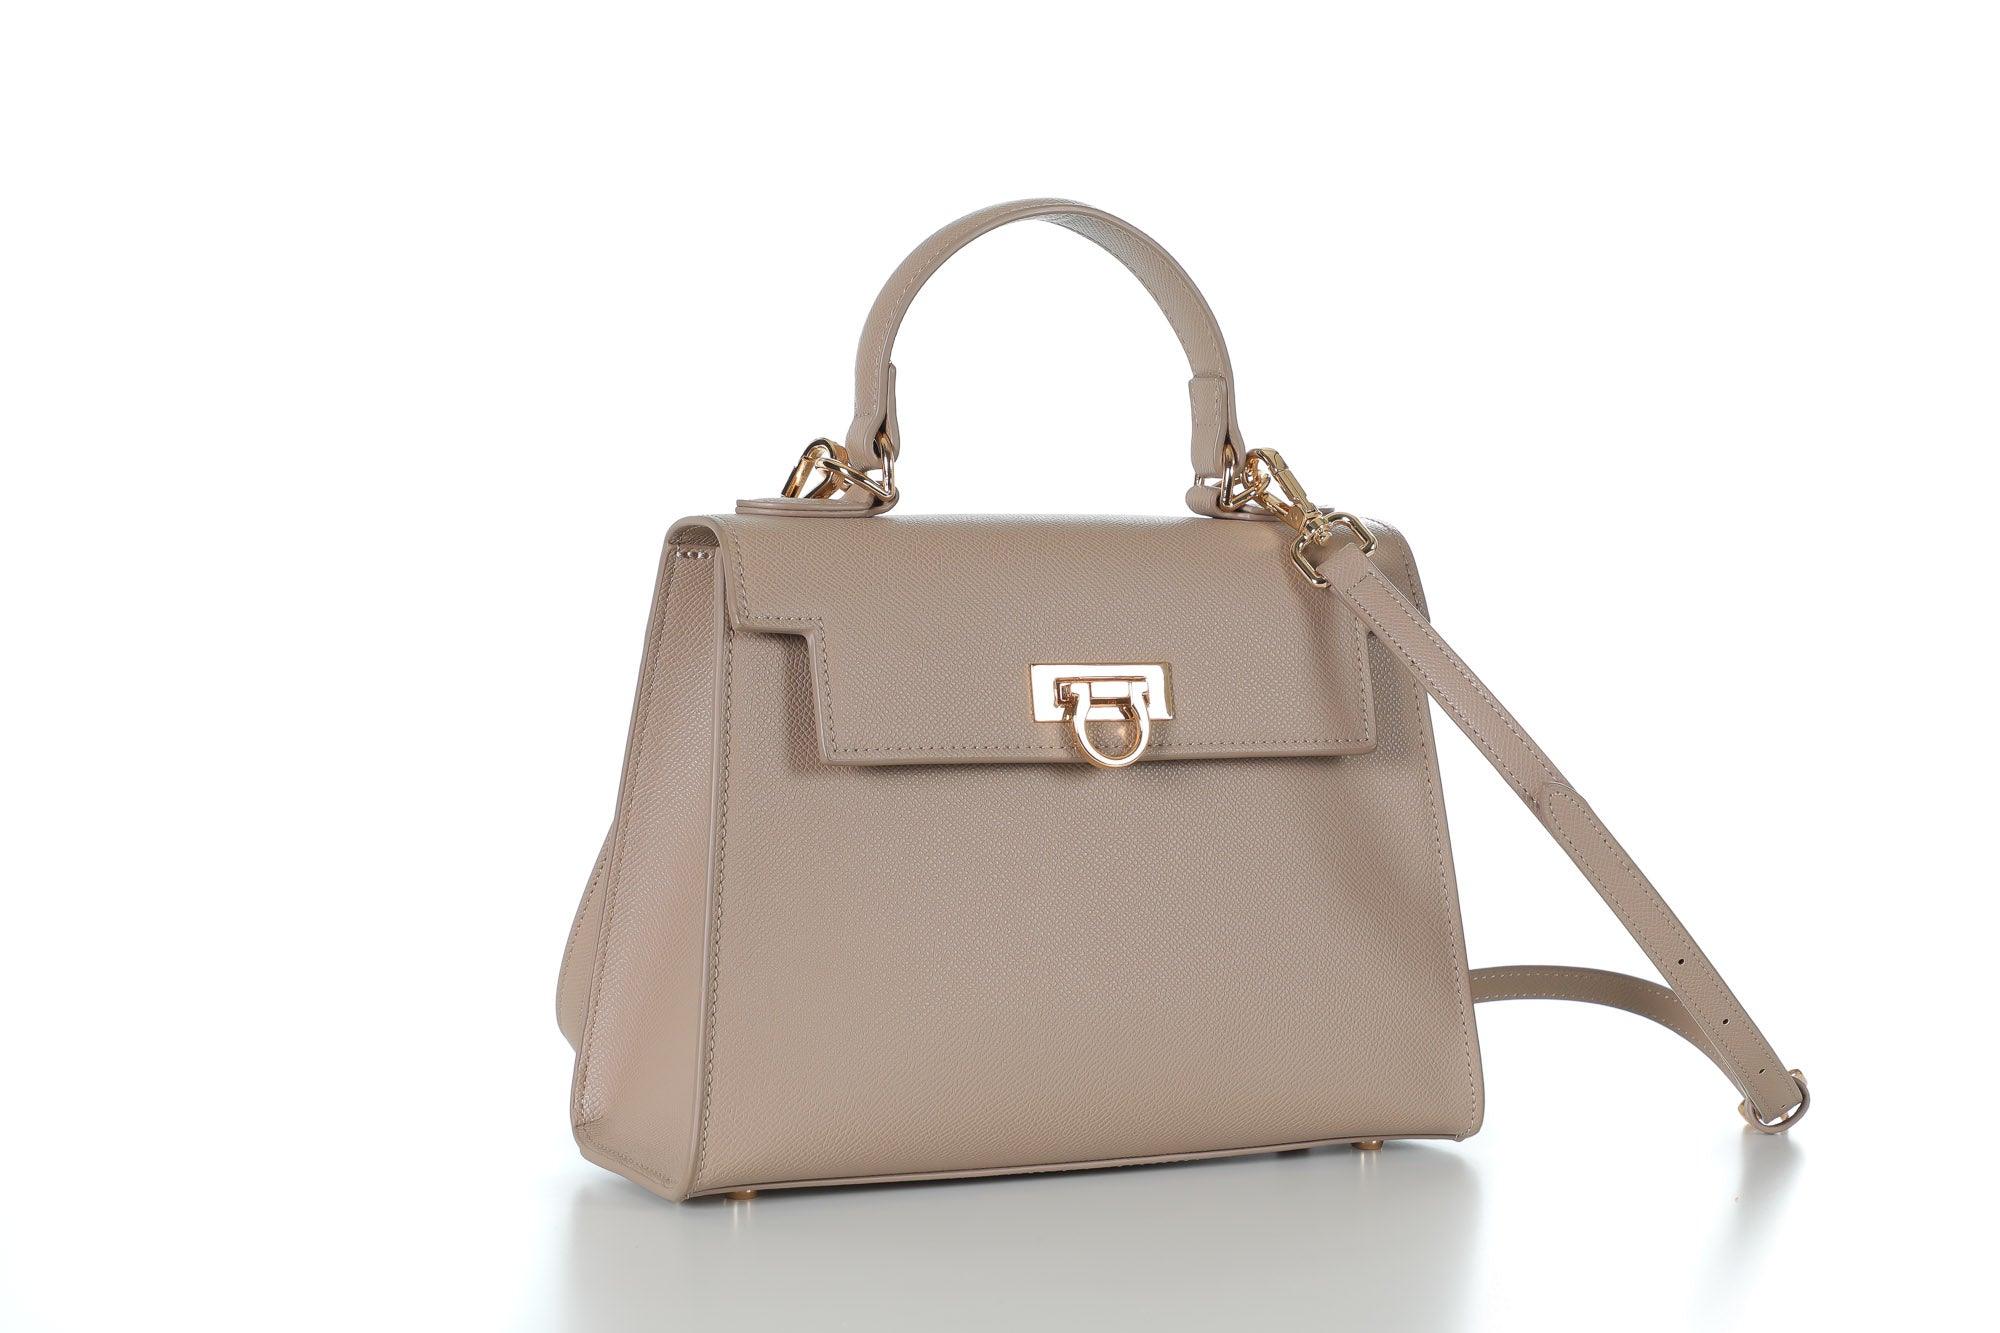 Classic Taupe Levantine Bag: Timeless classic Levantine bag in sophisticated taupe, a must-have wardrobe staple.